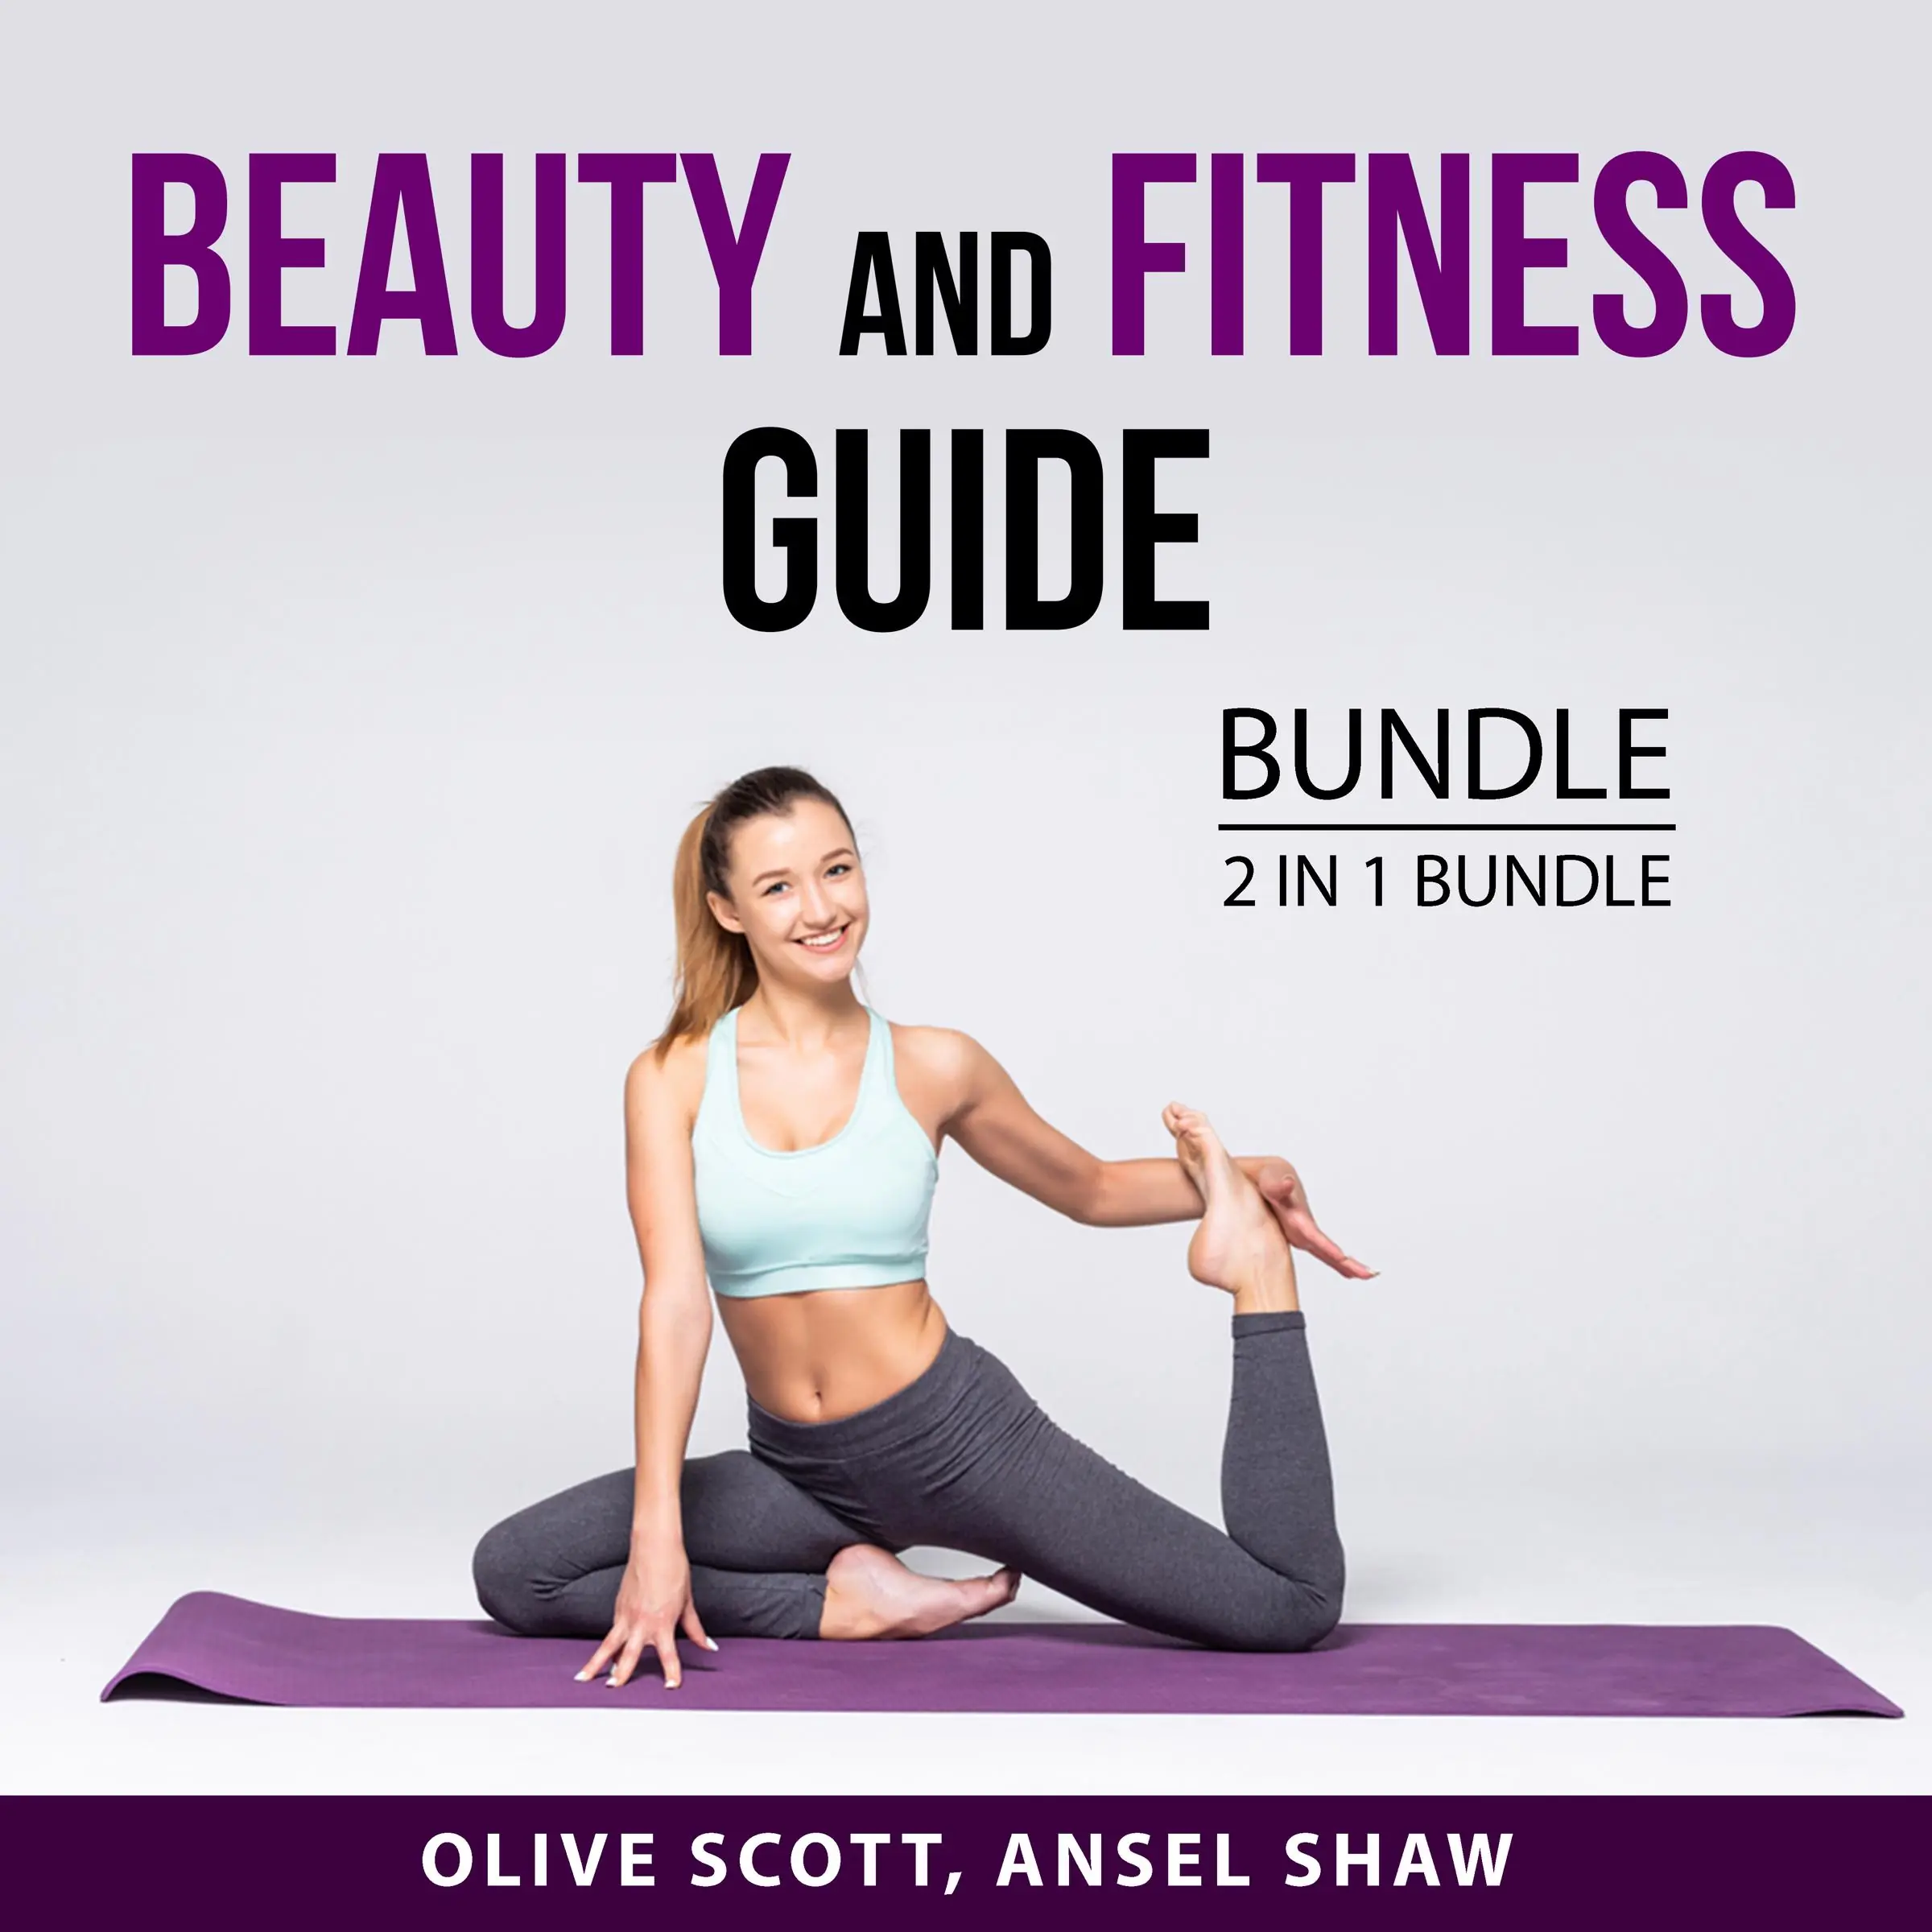 Beauty and Fitness Guide Bundle, 2 in 1 bundle: Renegade Beauty, and Building the Ultimate Body Audiobook by and Ansel Shaw